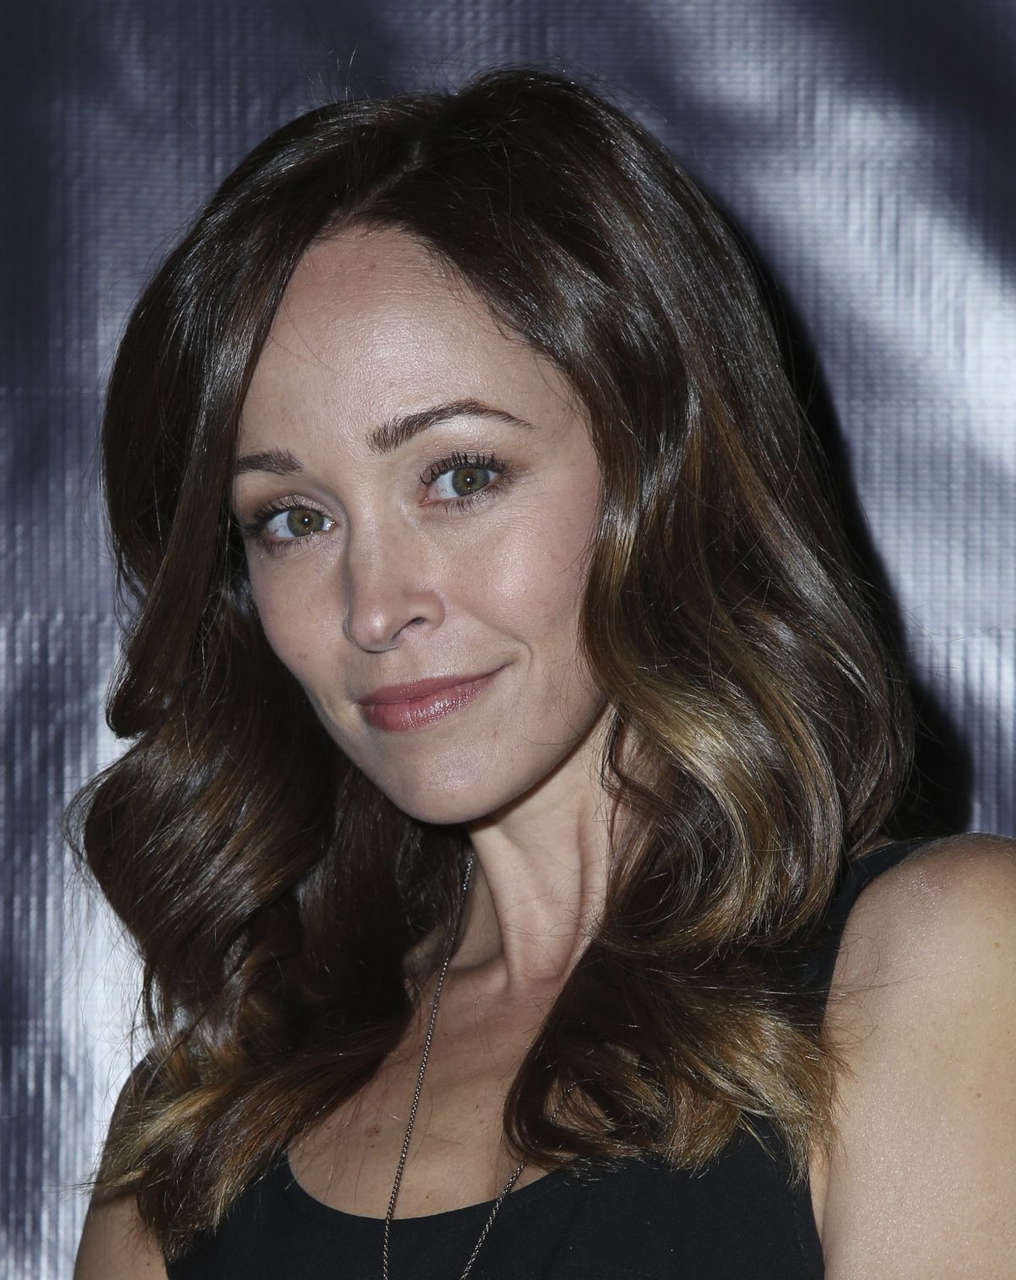 Autumn Reeser Party Celebrating 25 Years Of P S Arts Los Angeles